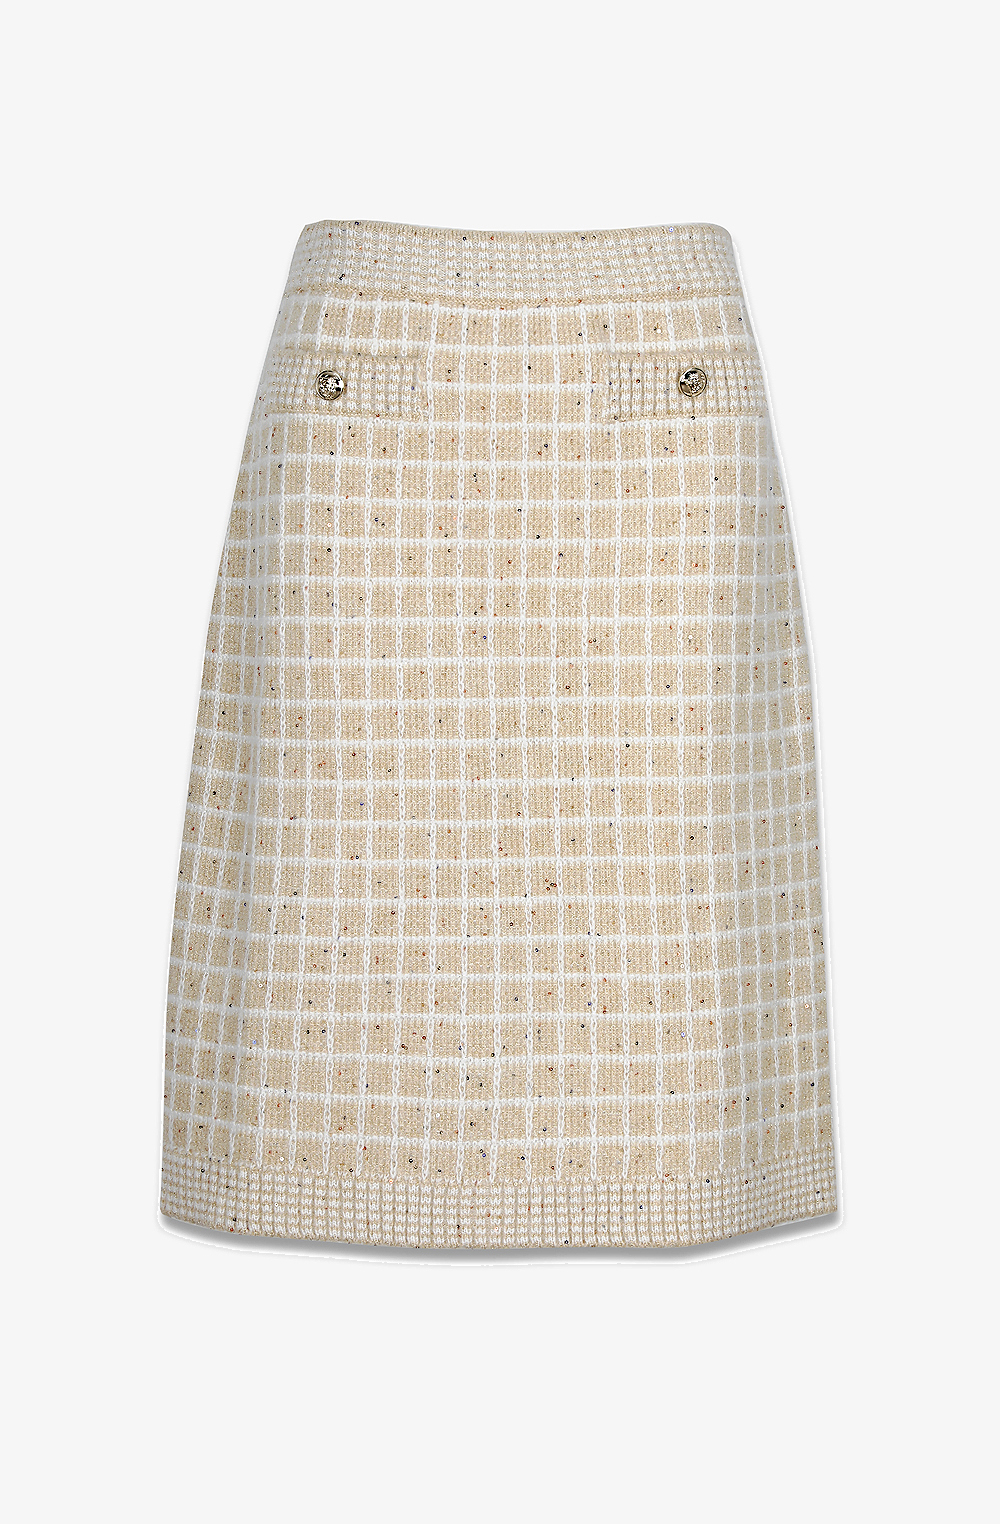 HIGH QUALITY LINE - MYEYEKO 23 EARLY SPRING / BARRIE SEQUIN TWEED KNIT SKIRT (GOLD)